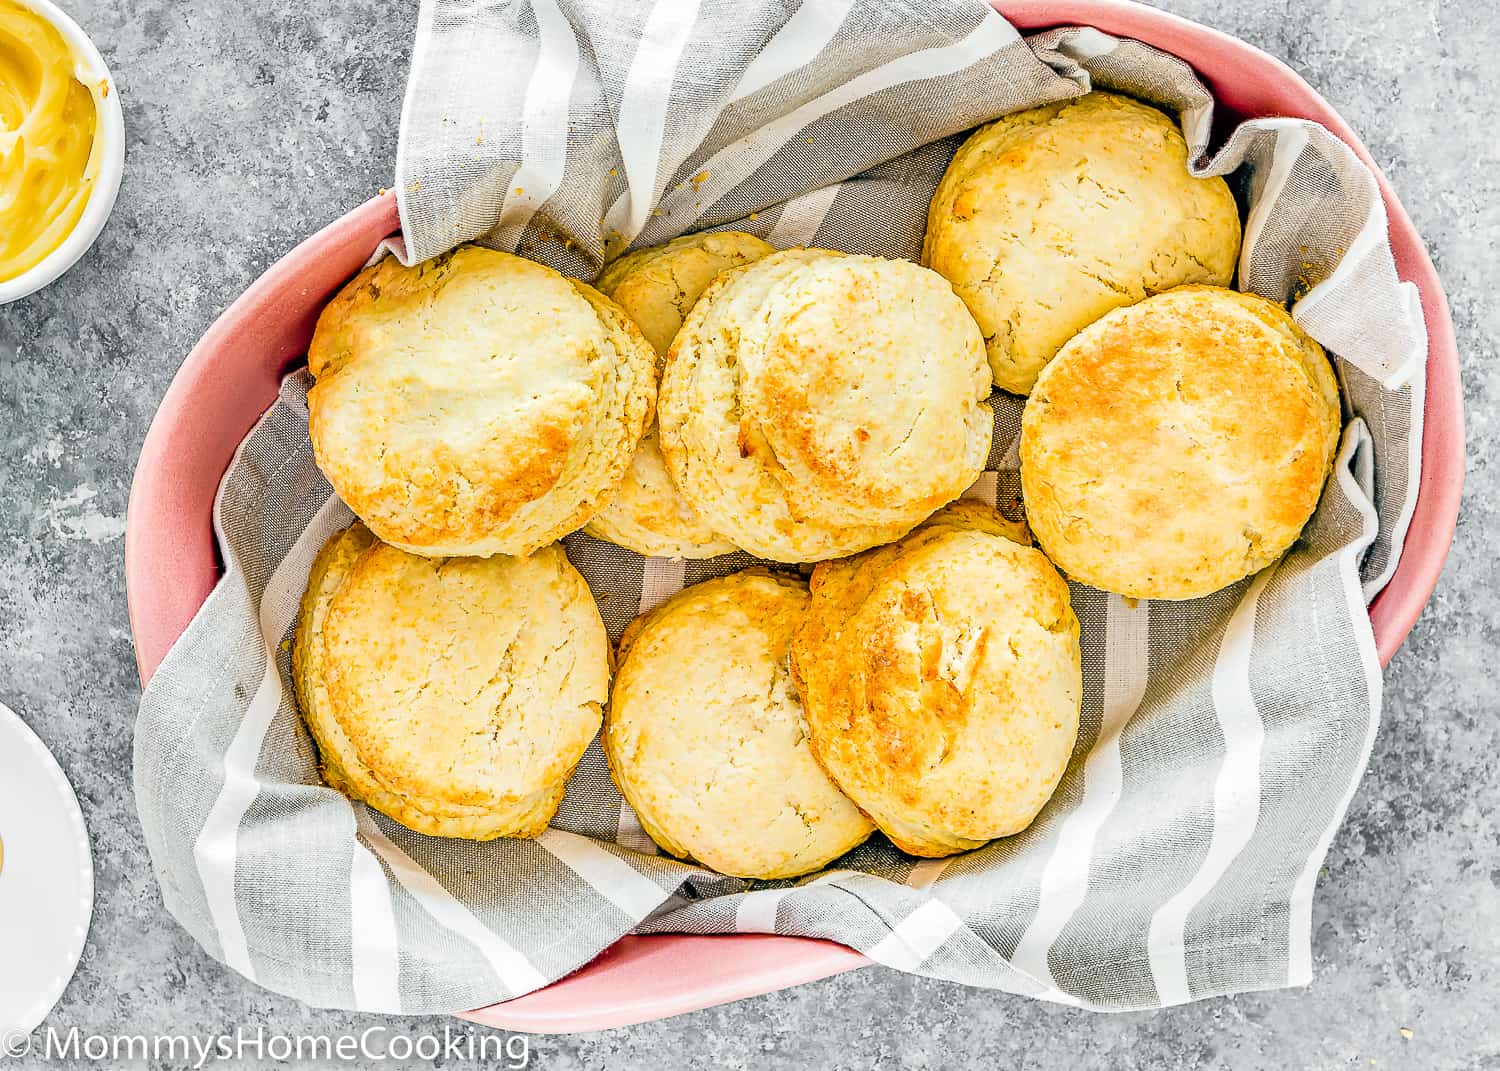 eggless homemade biscuits in a pink serving bowl with a gray kitchen towel.